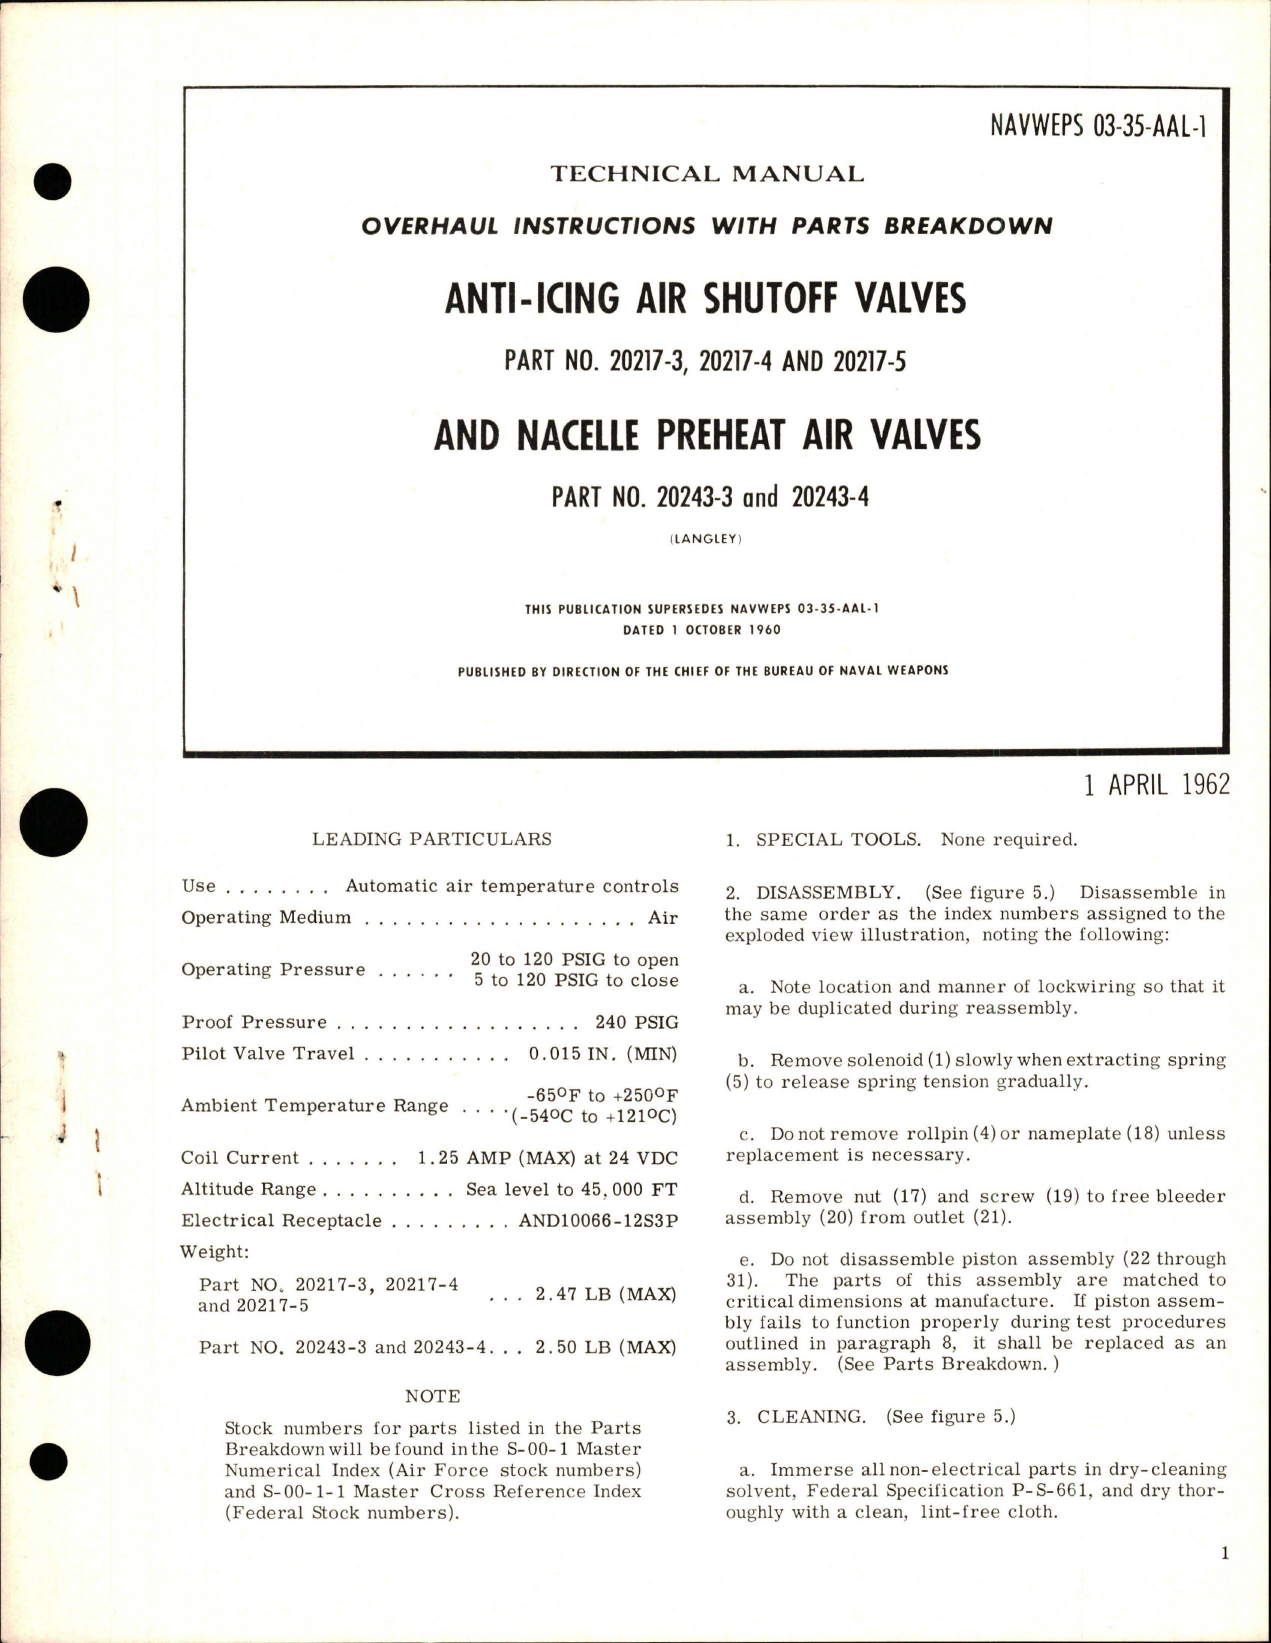 Sample page 1 from AirCorps Library document: Overhaul Instructions with Parts Breakdown for Anti-Icing Air Shutoff Valves and Nacelle Preheat Air Valves